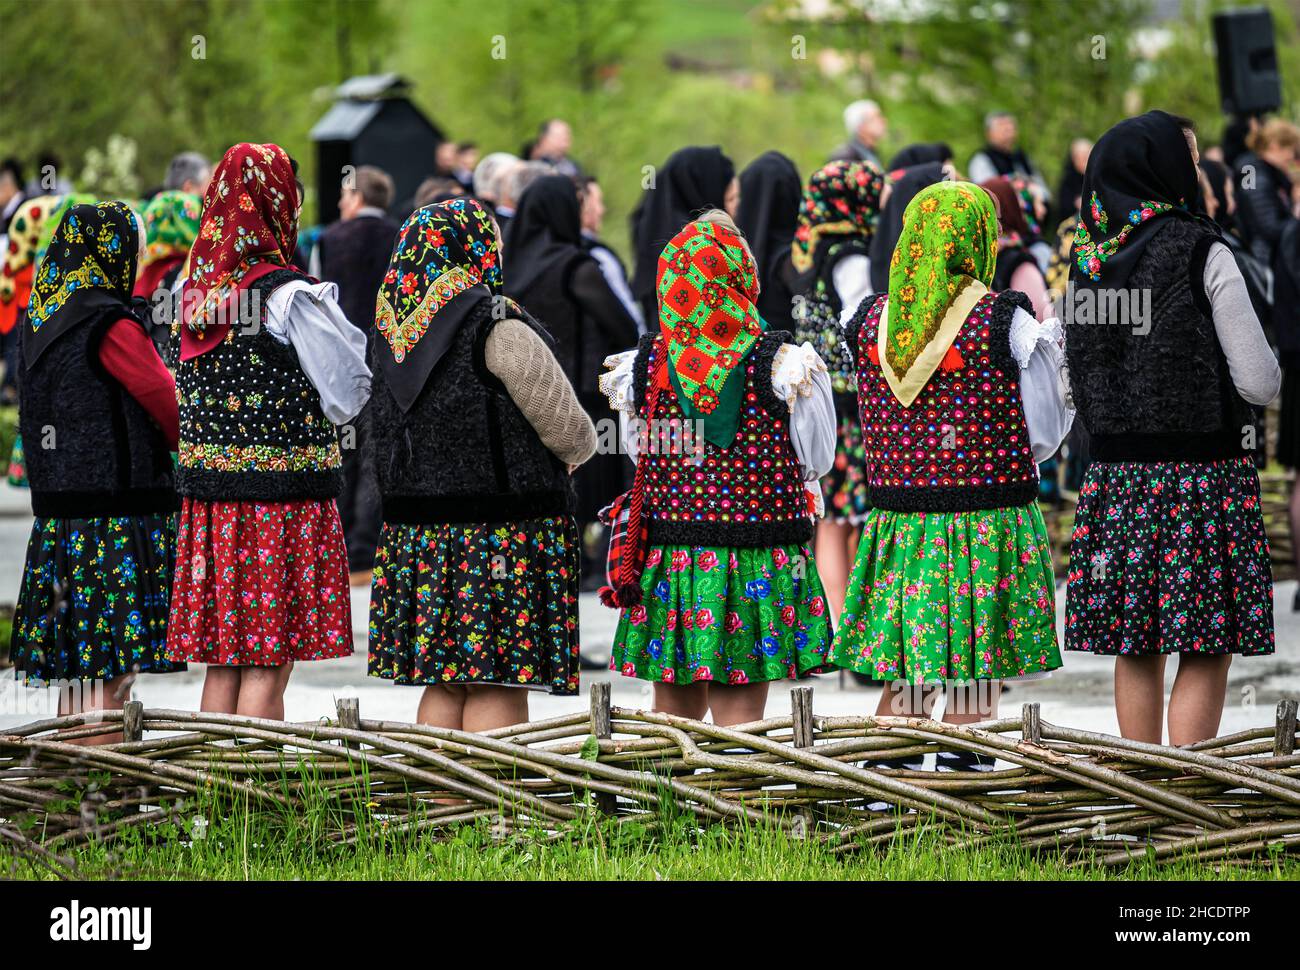 Row of traditional costumes in the northern part of Romania. Photo taken on 16th of May 2021 Ieud town, Maramures county, Romania. Stock Photo